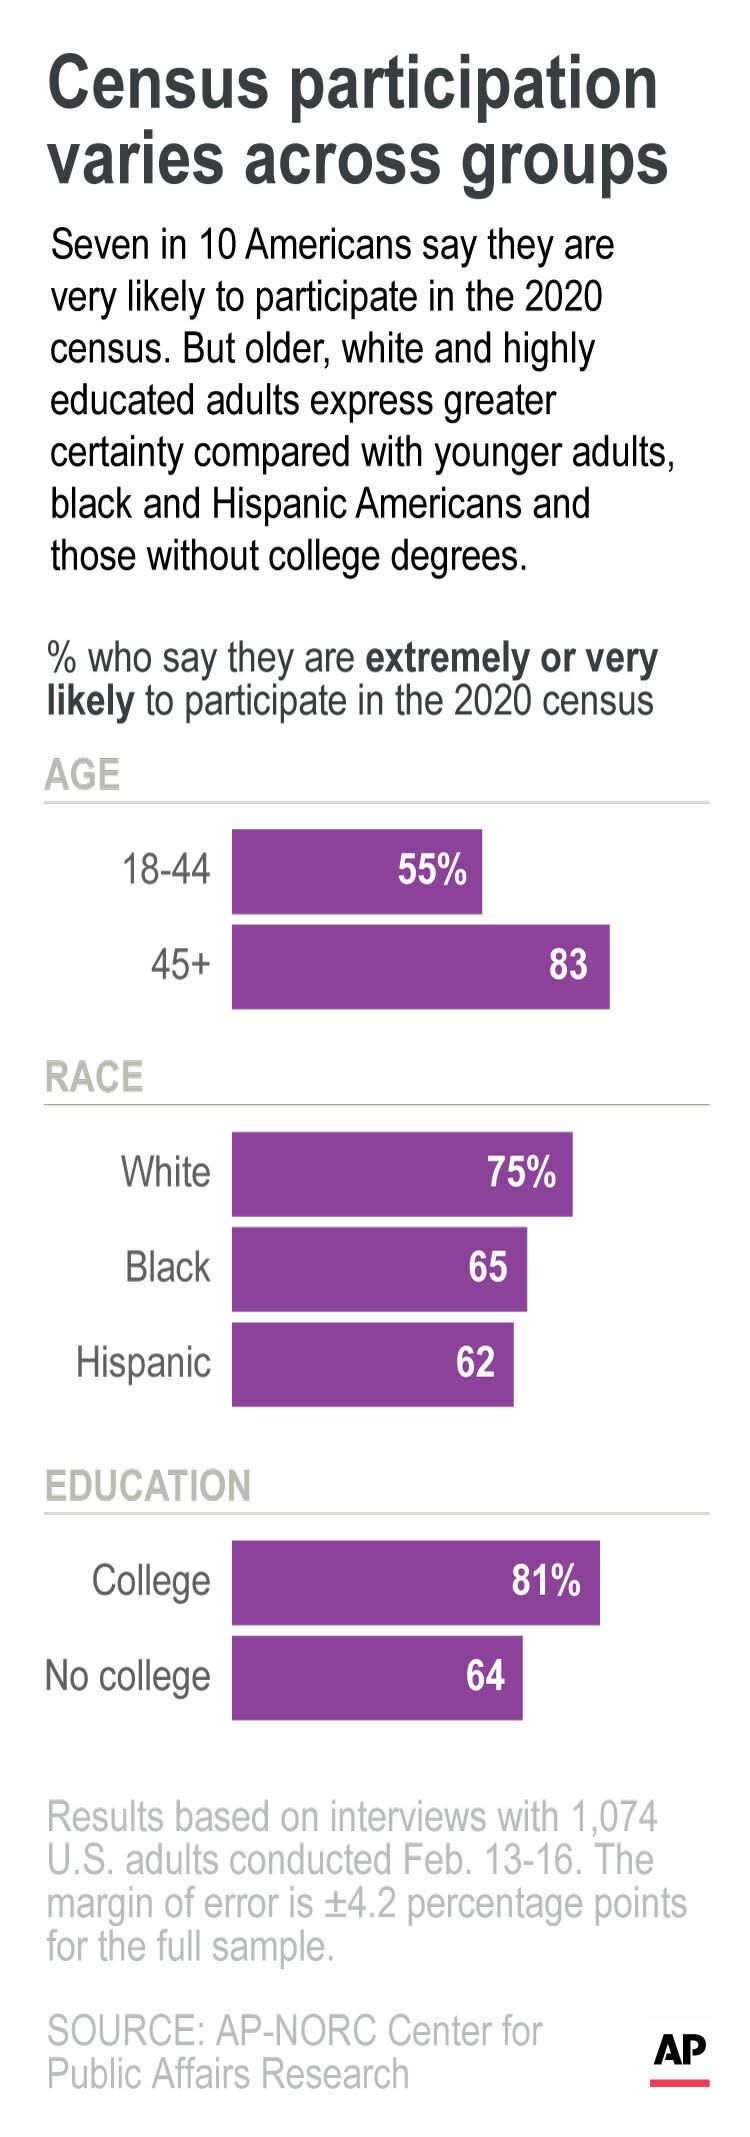 Seven in 10 Americans say they are very likely to participate in the 2020 census. But older, white and highly educated adults express greater certainty compared with younger adults, black and Hispanic Americans and those without college degrees. ;